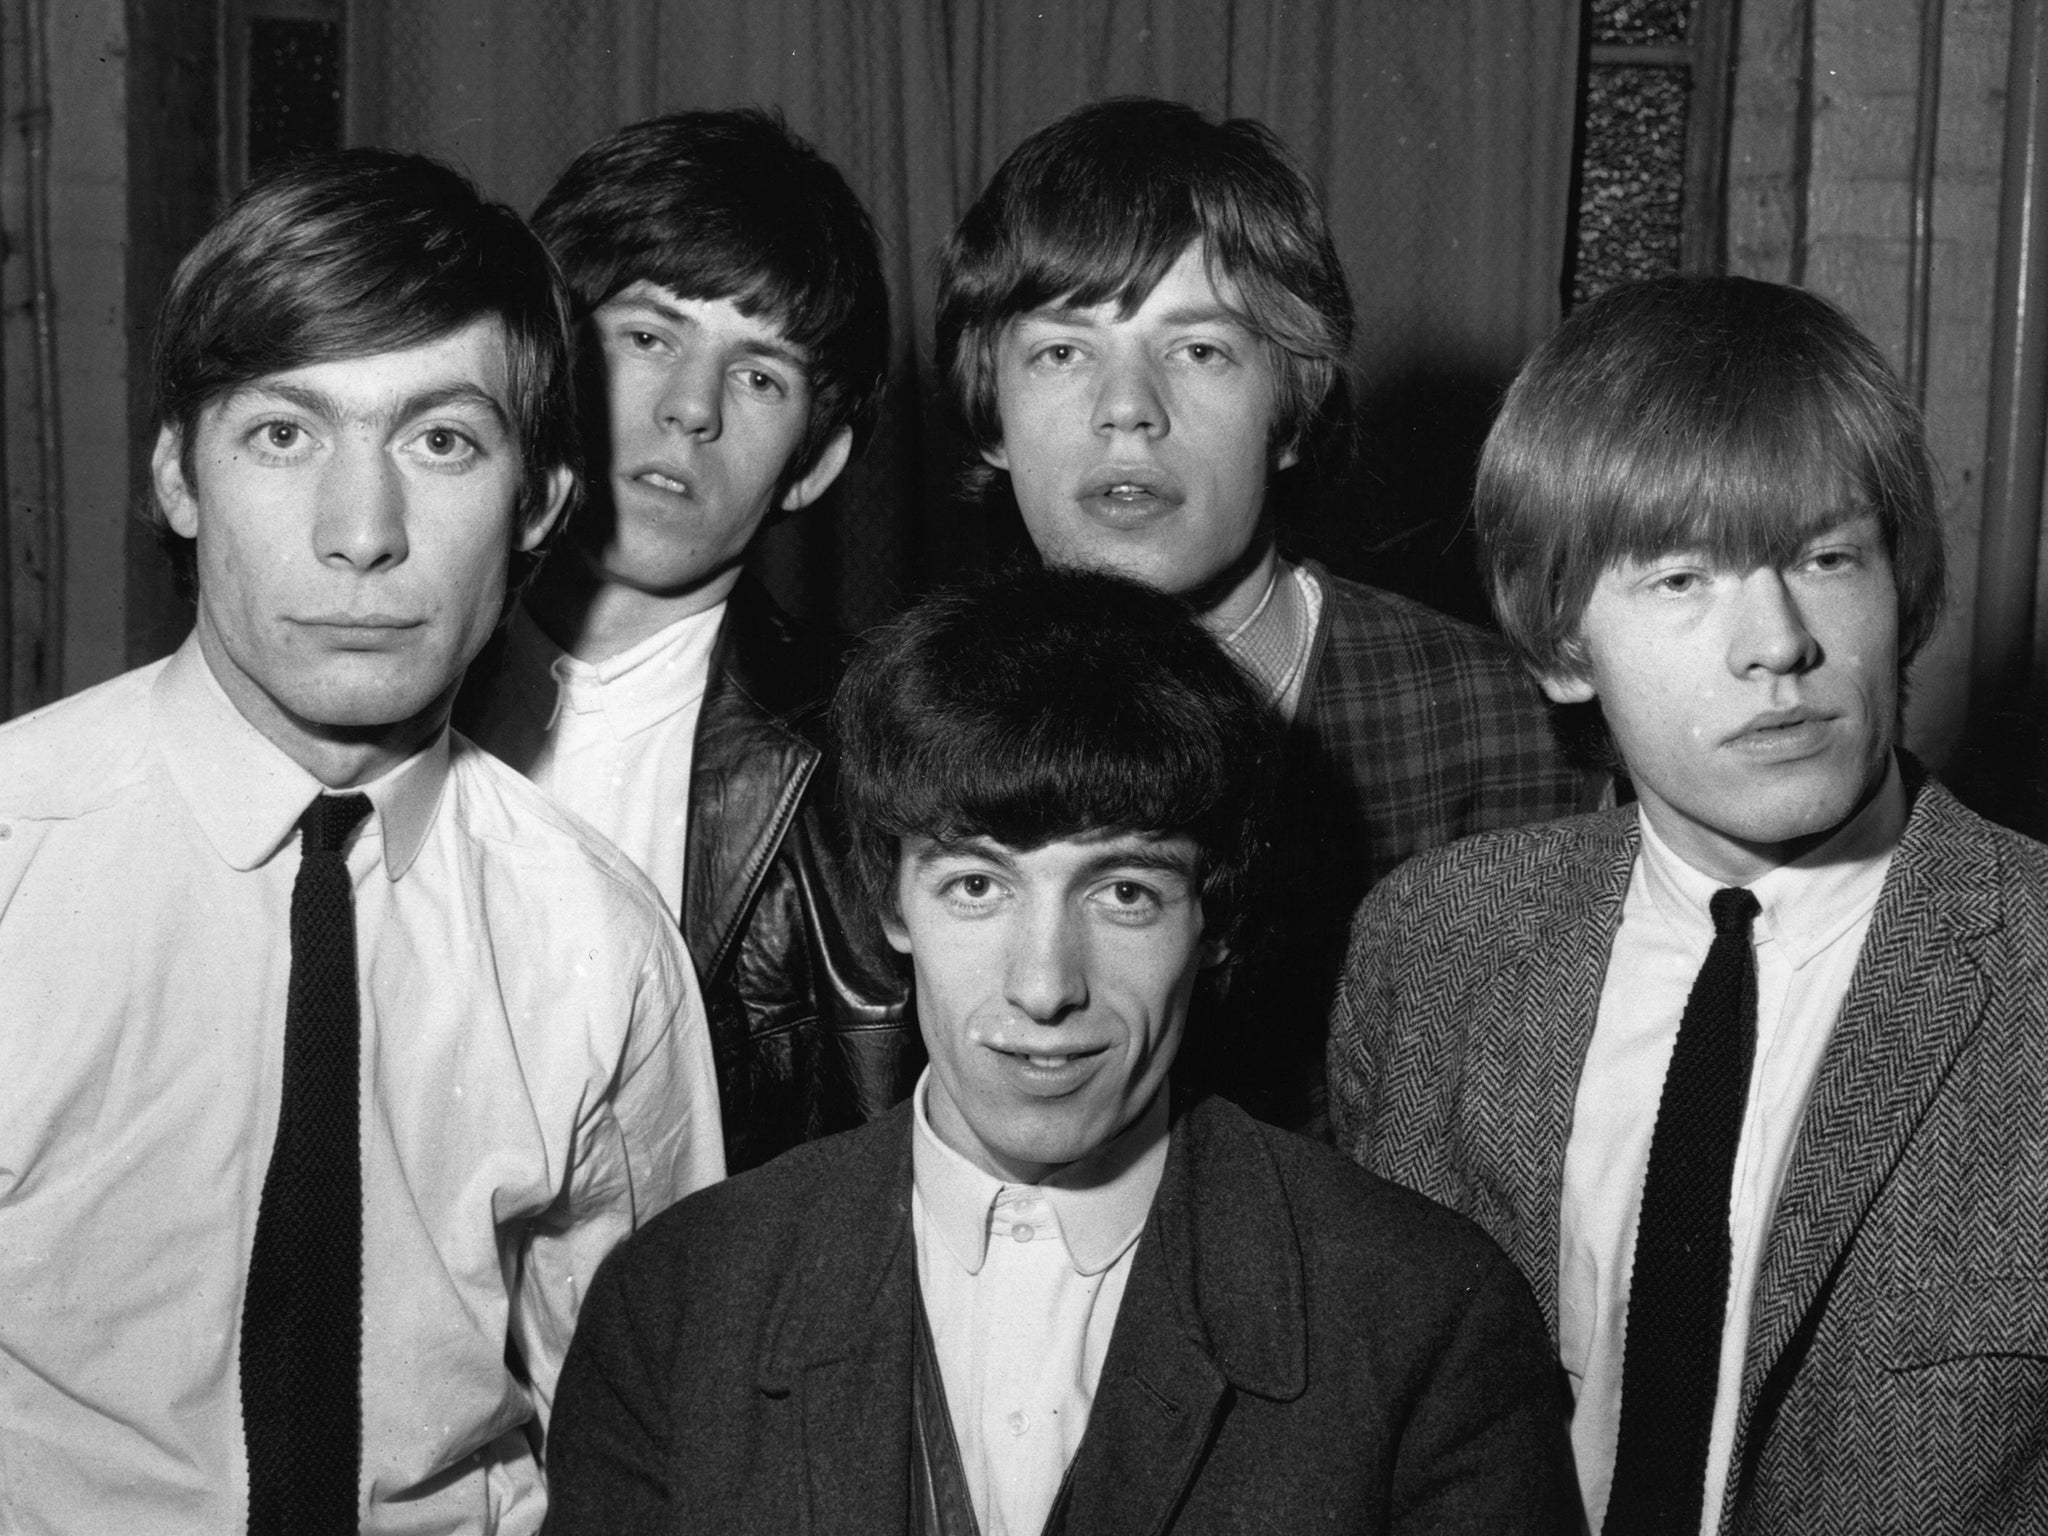 The Stones’ debut album appeared in 1964